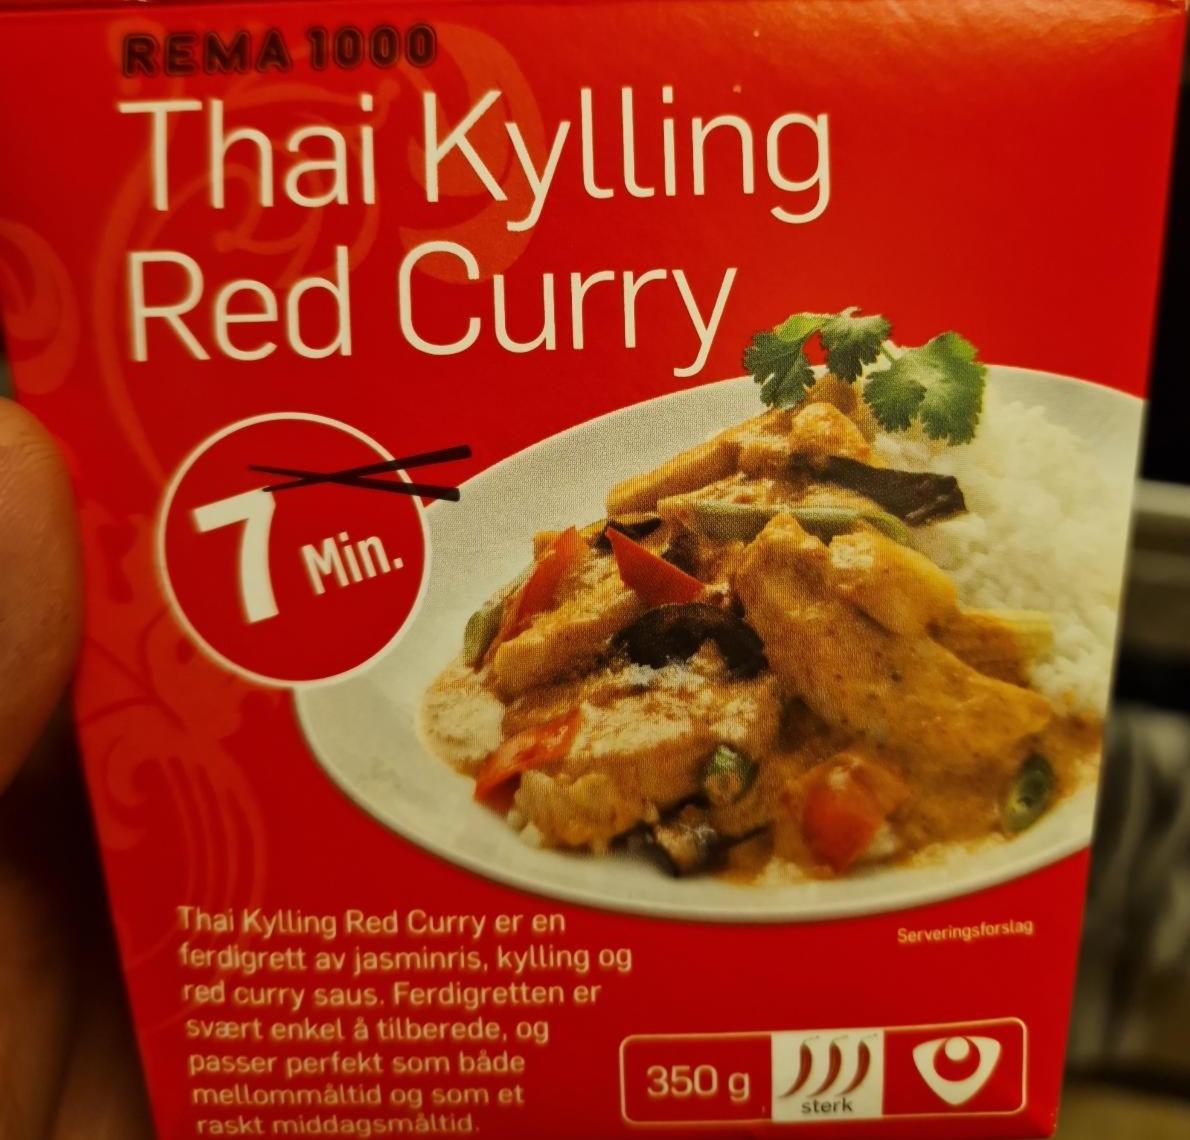 Fotografie - Thai Kylling Red Curry Rema1000